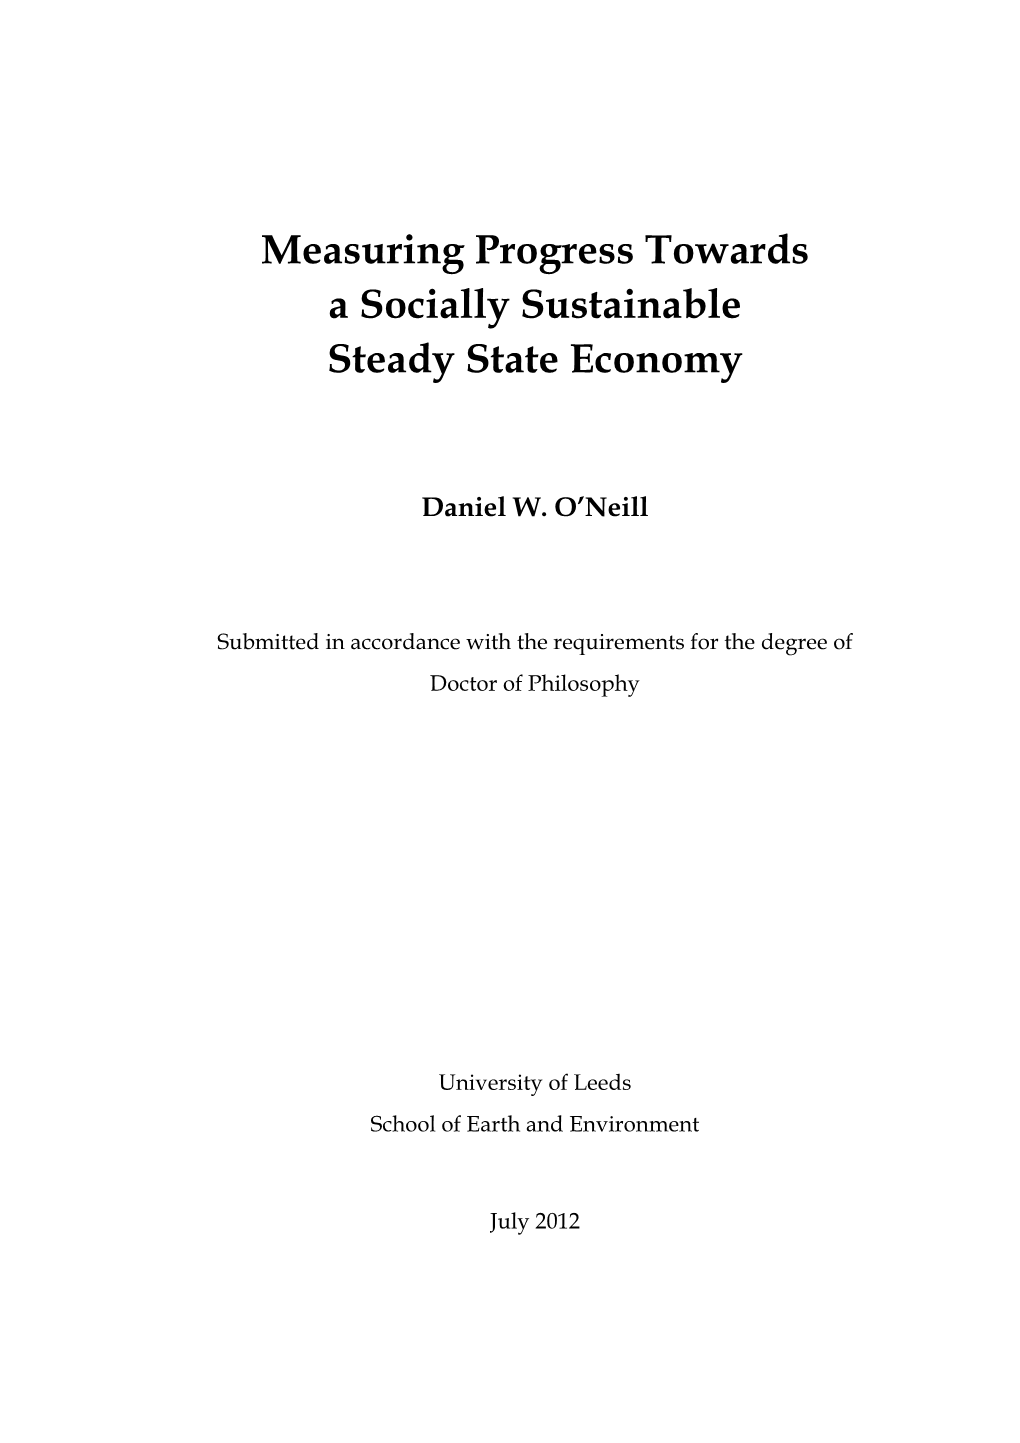 Measuring Progress Towards a Socially Sustainable Steady State Economy